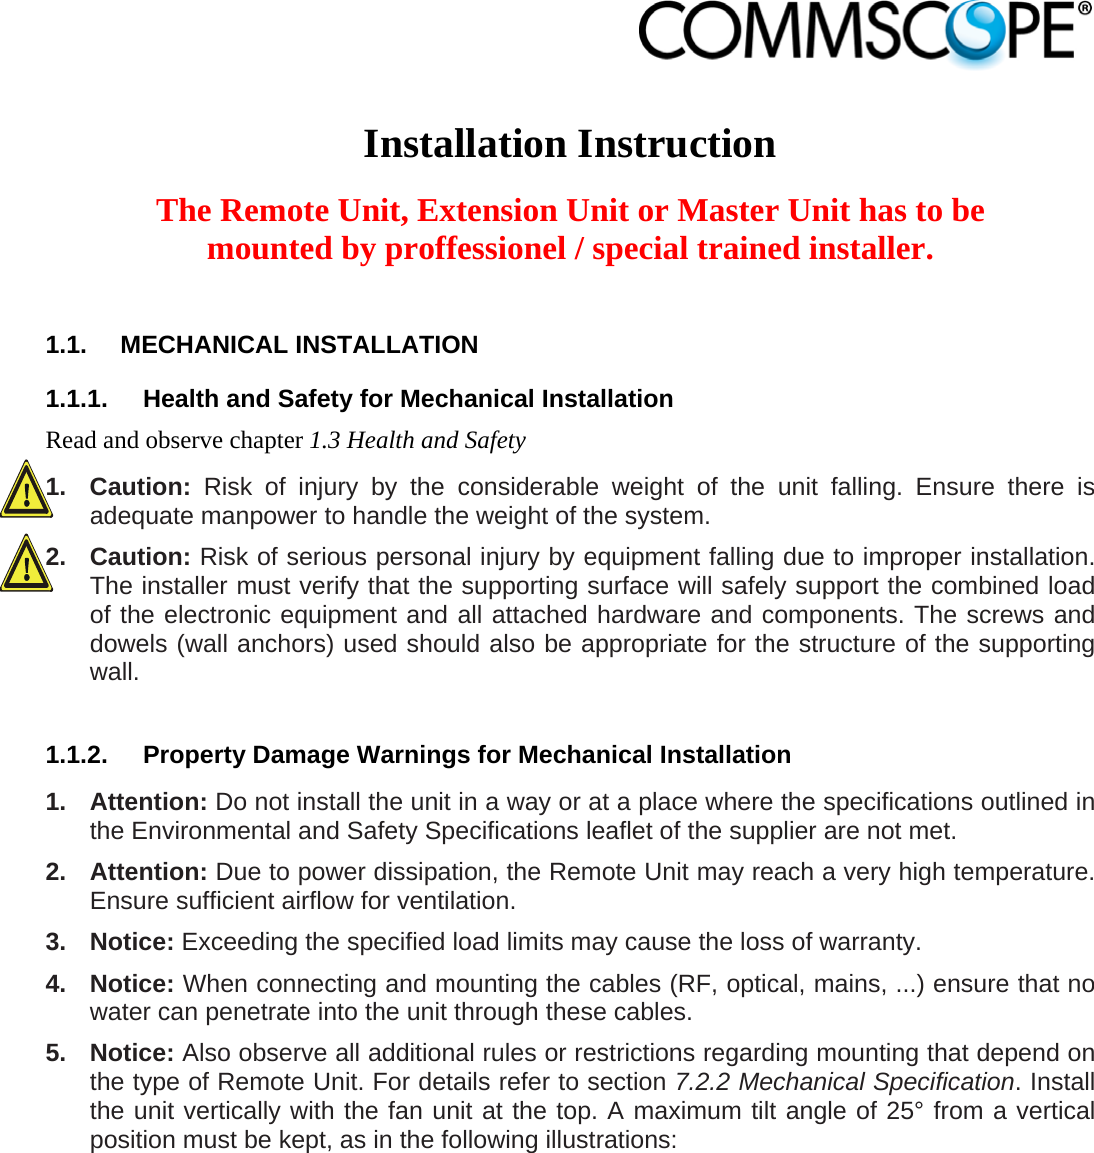                             Installation Instruction  The Remote Unit, Extension Unit or Master Unit has to be mounted by proffessionel / special trained installer.  1.1. MECHANICAL INSTALLATION 1.1.1.  Health and Safety for Mechanical Installation Read and observe chapter 1.3 Health and Safety 1. Caution: Risk of injury by the considerable weight of the unit falling. Ensure there is adequate manpower to handle the weight of the system. 2. Caution: Risk of serious personal injury by equipment falling due to improper installation. The installer must verify that the supporting surface will safely support the combined load of the electronic equipment and all attached hardware and components. The screws and dowels (wall anchors) used should also be appropriate for the structure of the supporting wall.  1.1.2.  Property Damage Warnings for Mechanical Installation 1. Attention: Do not install the unit in a way or at a place where the specifications outlined in the Environmental and Safety Specifications leaflet of the supplier are not met. 2. Attention: Due to power dissipation, the Remote Unit may reach a very high temperature. Ensure sufficient airflow for ventilation. 3. Notice: Exceeding the specified load limits may cause the loss of warranty. 4. Notice: When connecting and mounting the cables (RF, optical, mains, ...) ensure that no water can penetrate into the unit through these cables. 5. Notice: Also observe all additional rules or restrictions regarding mounting that depend on the type of Remote Unit. For details refer to section 7.2.2 Mechanical Specification. Install the unit vertically with the fan unit at the top. A maximum tilt angle of 25° from a vertical position must be kept, as in the following illustrations:  